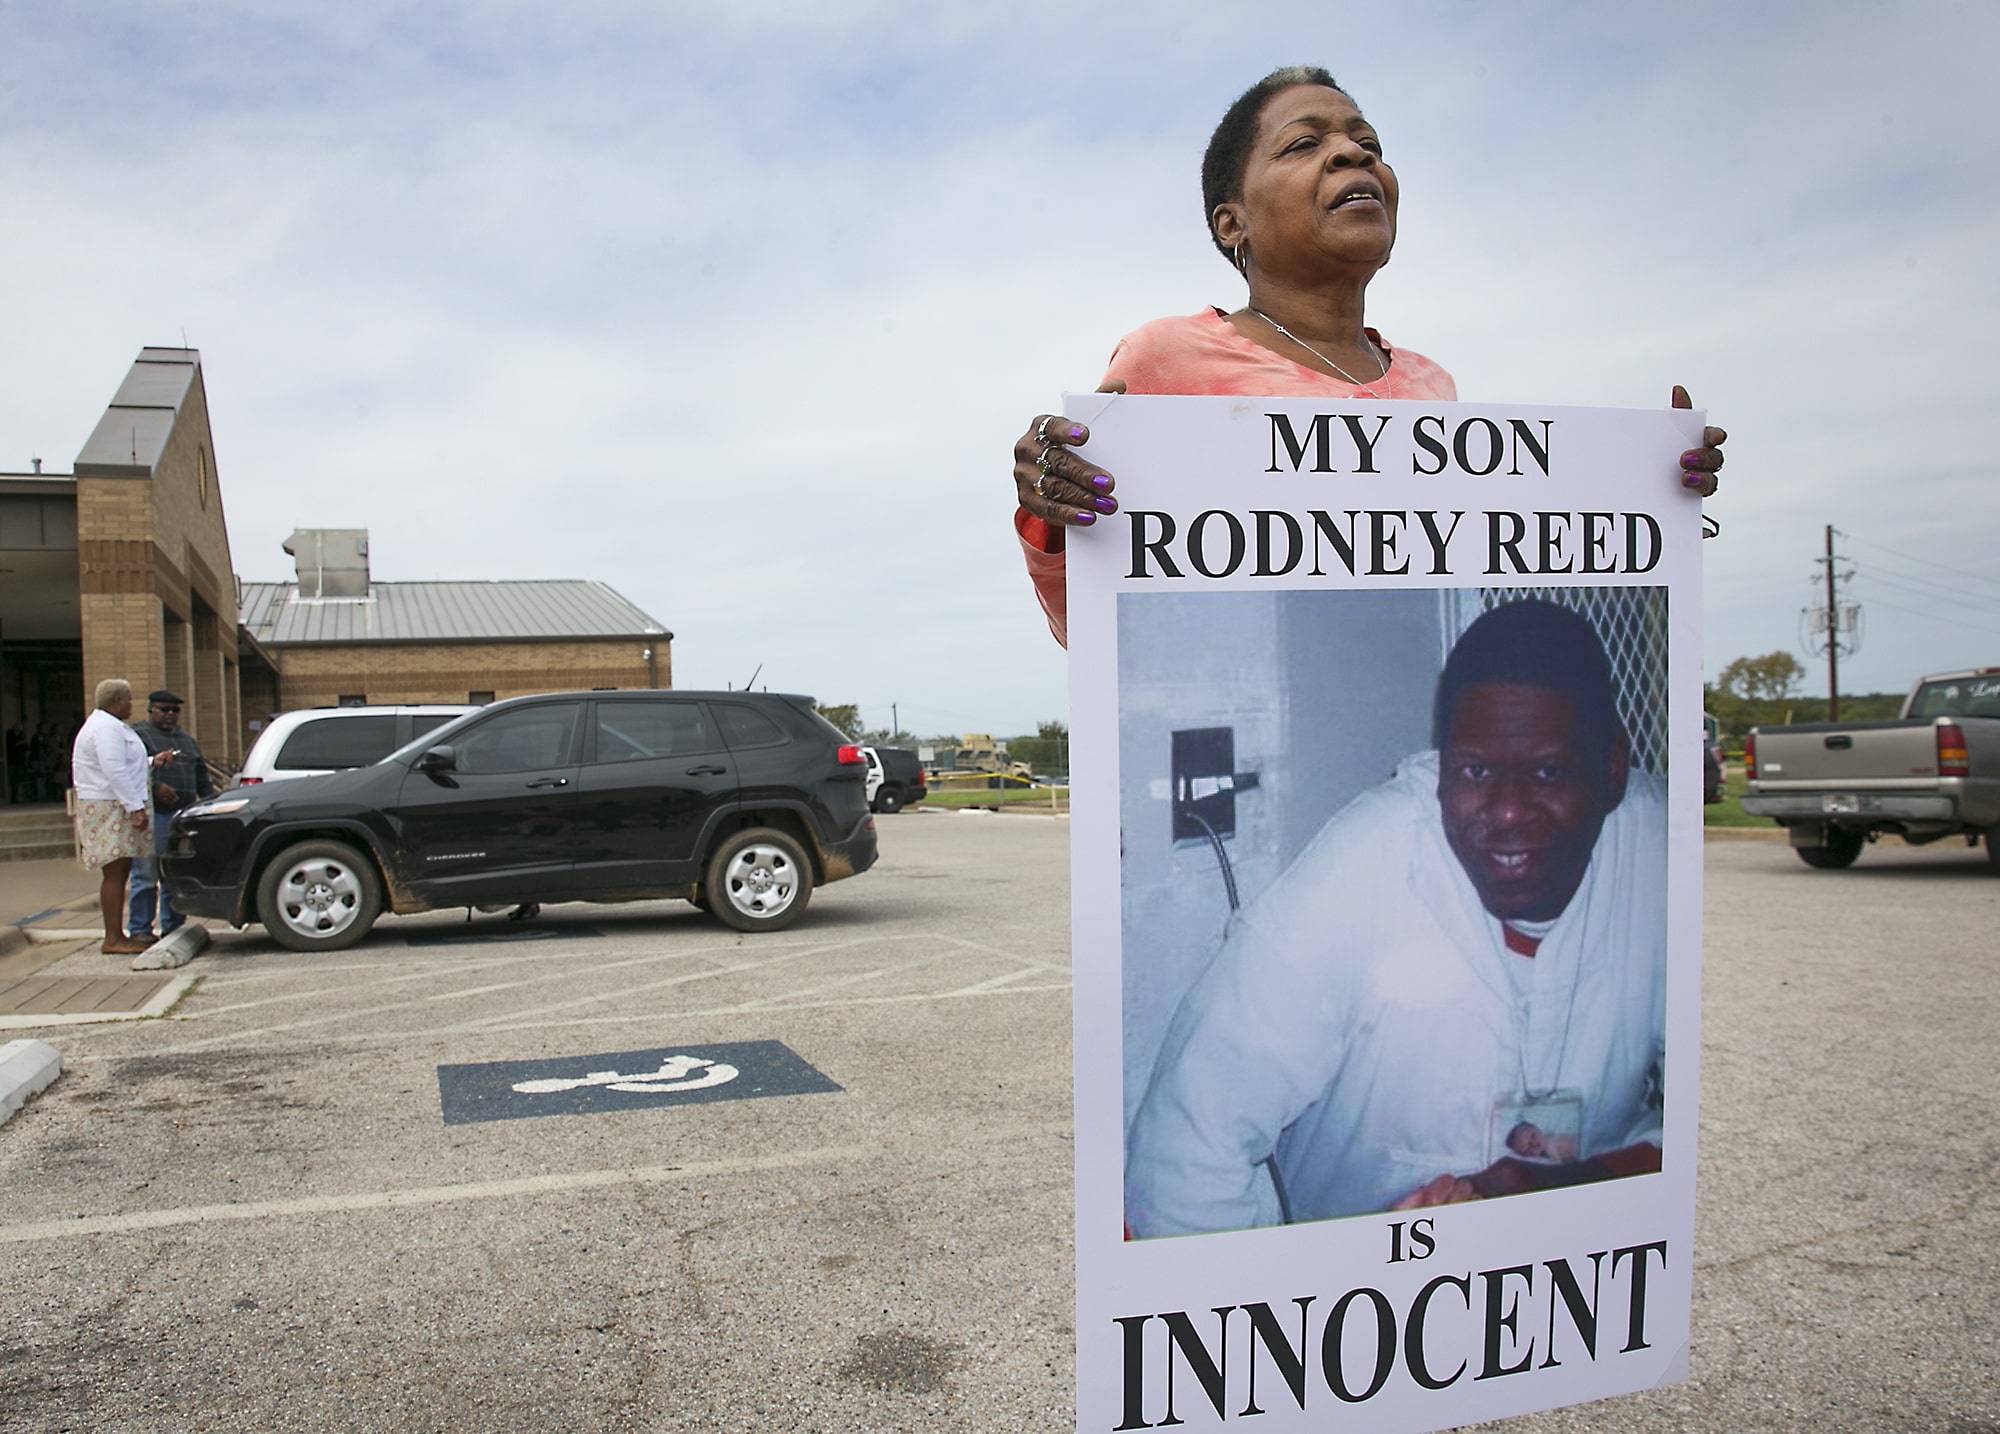 The U.S. Supreme Court Rules 6-3 in Favor of Rodney Reed